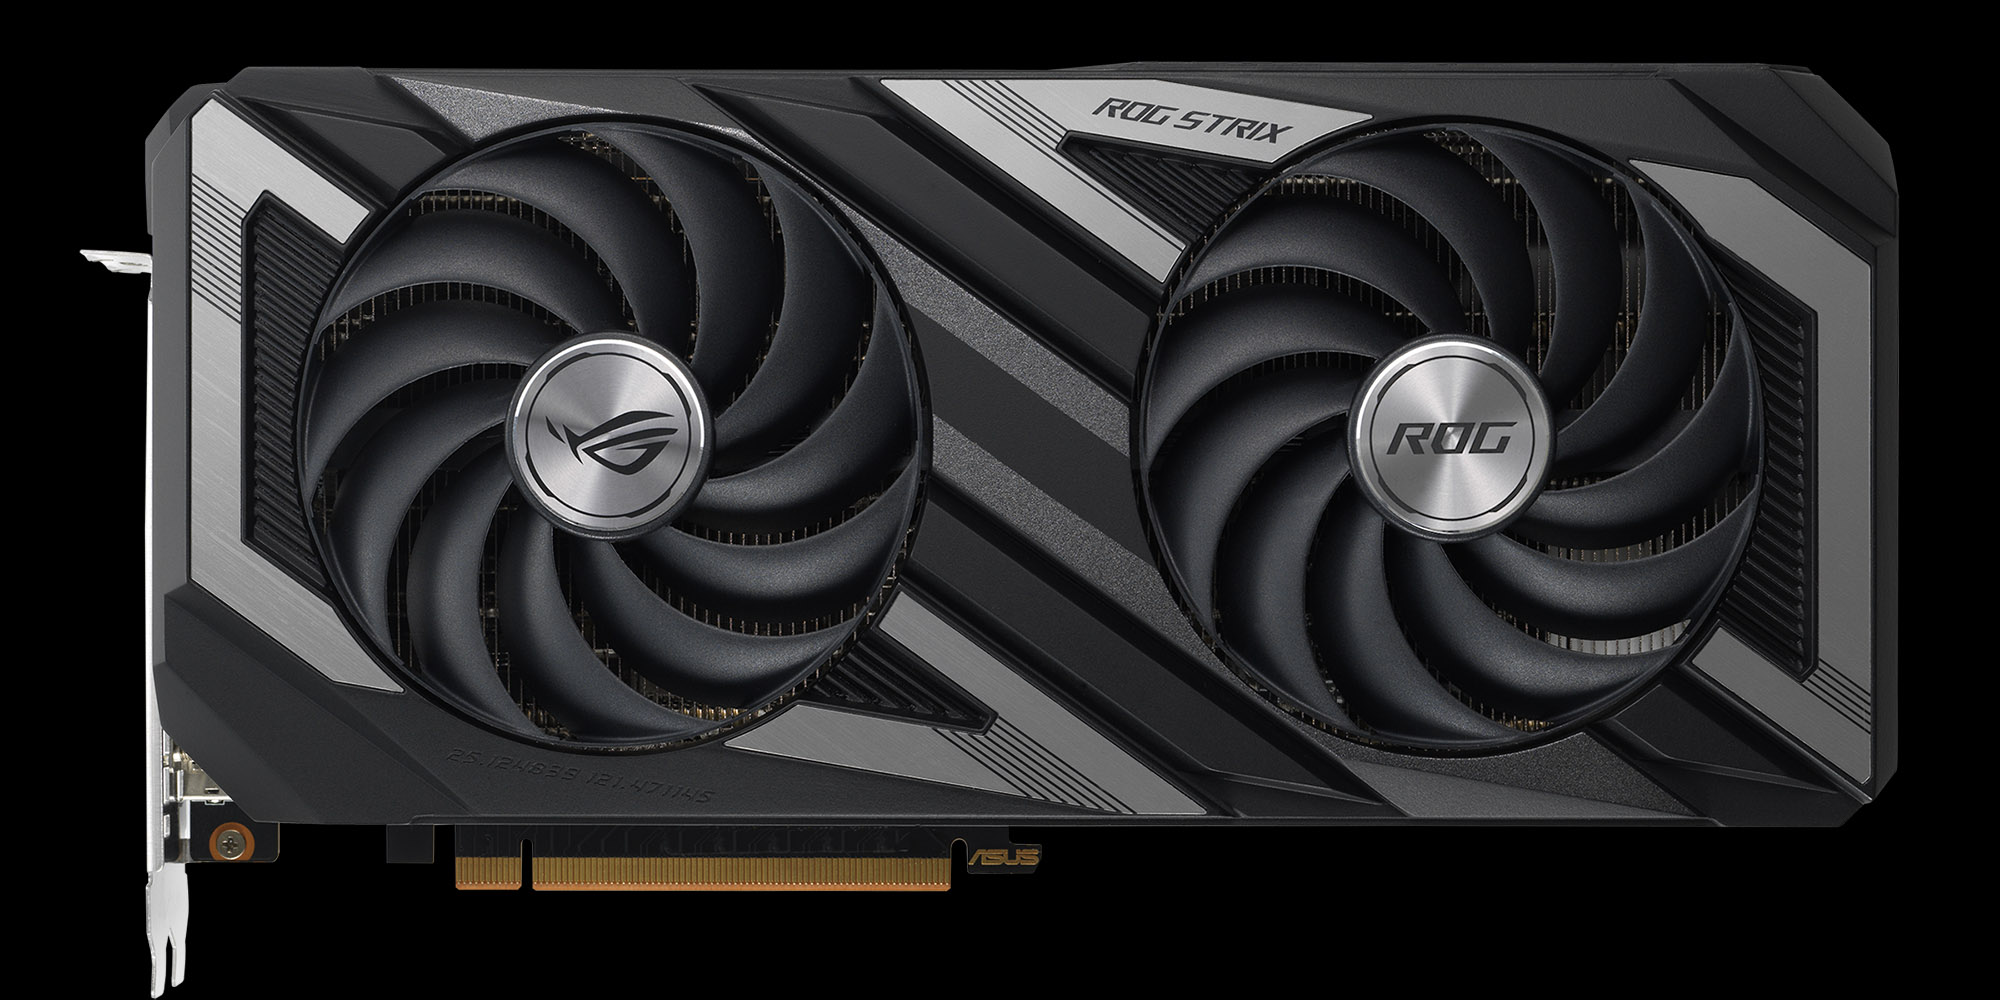 An image of the ROG Strix Radeon RX 6650 XT graphics card on a black background.